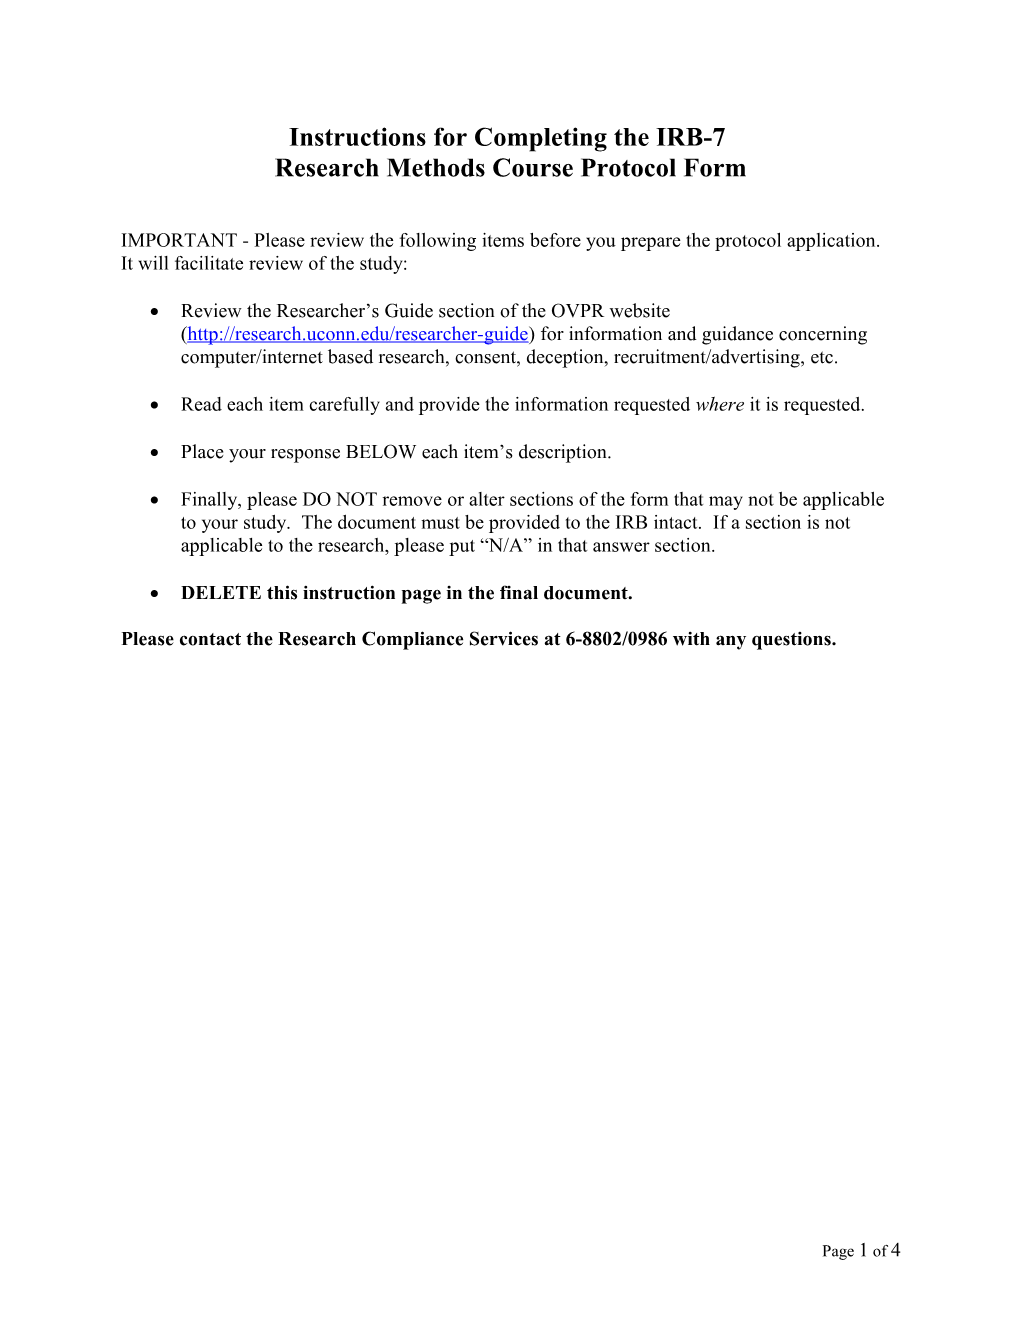 Research Methods Course Protocol Form